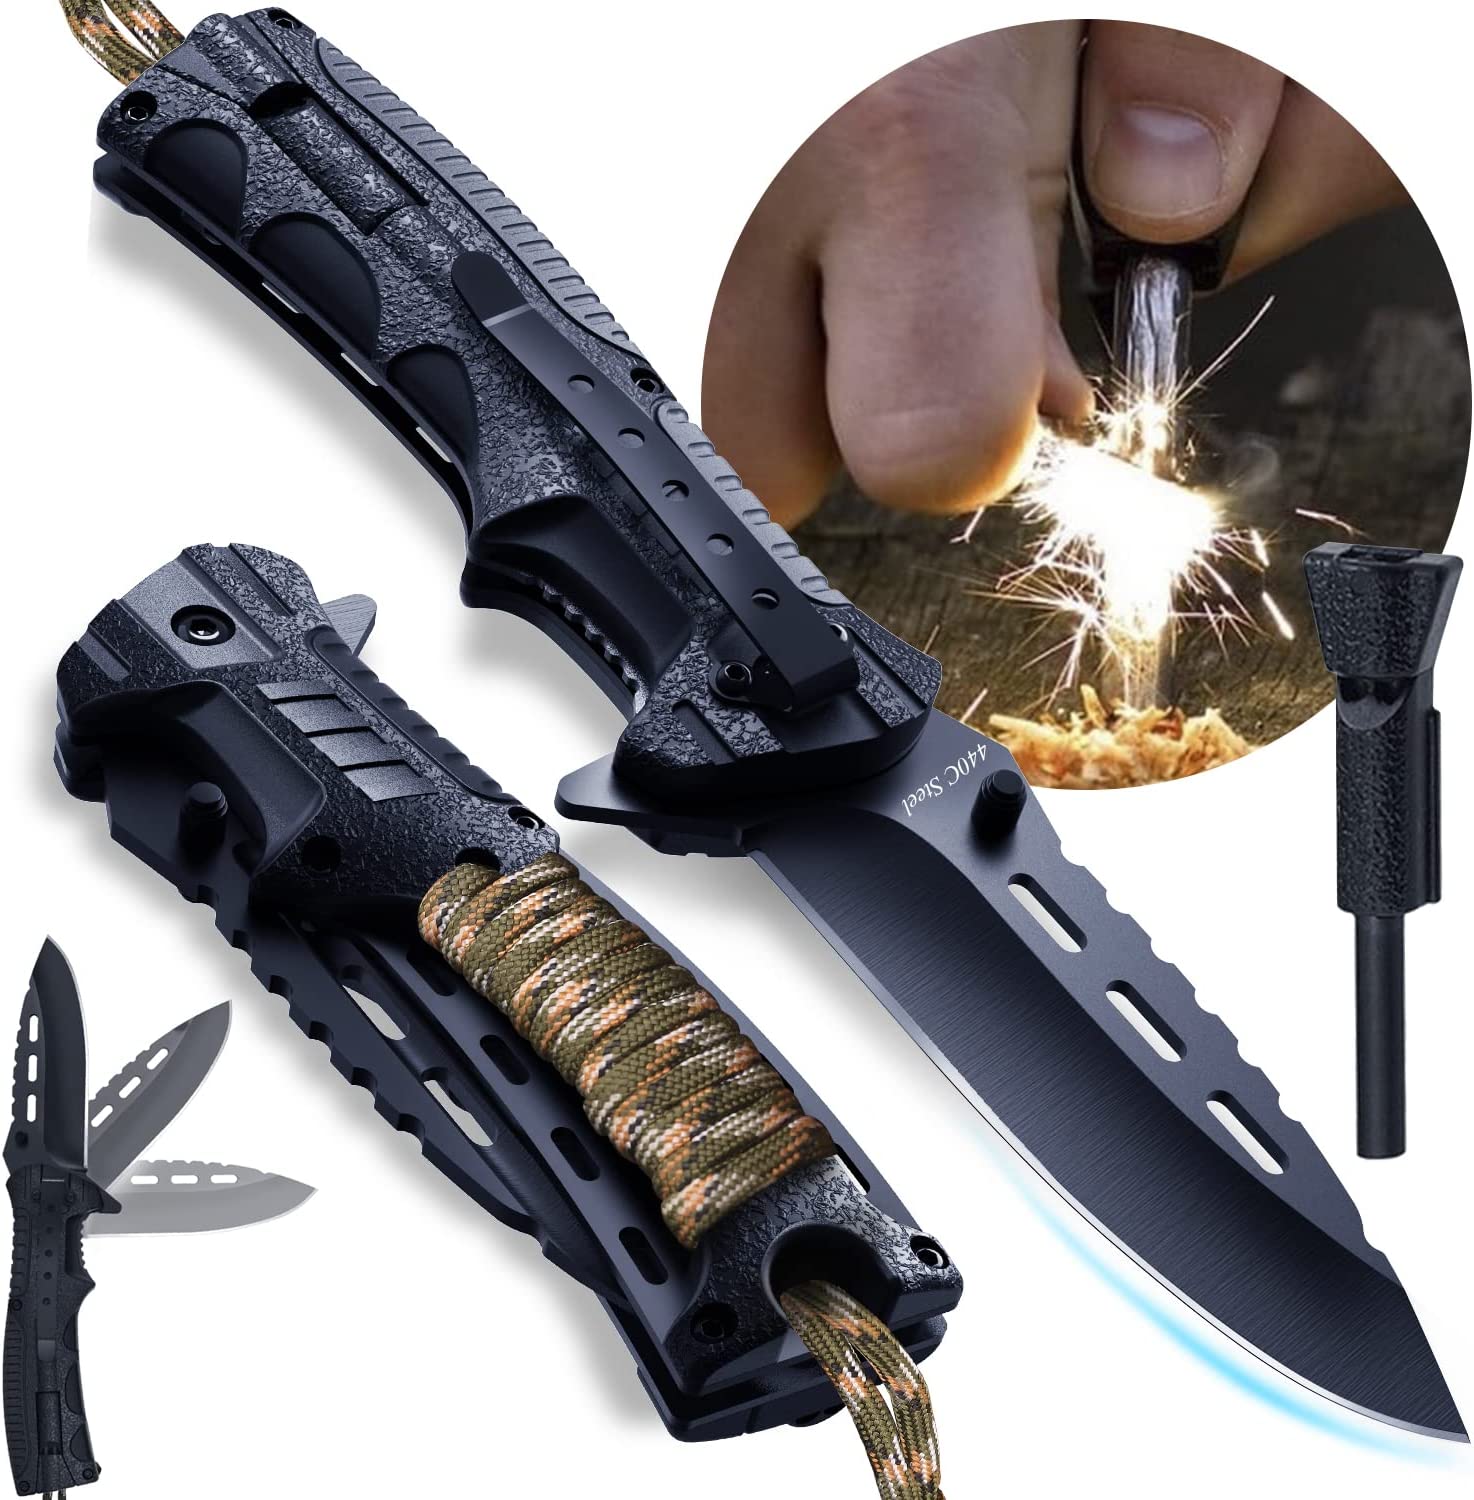 GRAND WAY Pocket Knife – Tactical Folding Knife – Spring Assisted Knife with Fire Starter Paracord Handle – Best EDC Survival Hiking Hunting Camping Knife – Knife with Firestarter and Whistle 6772